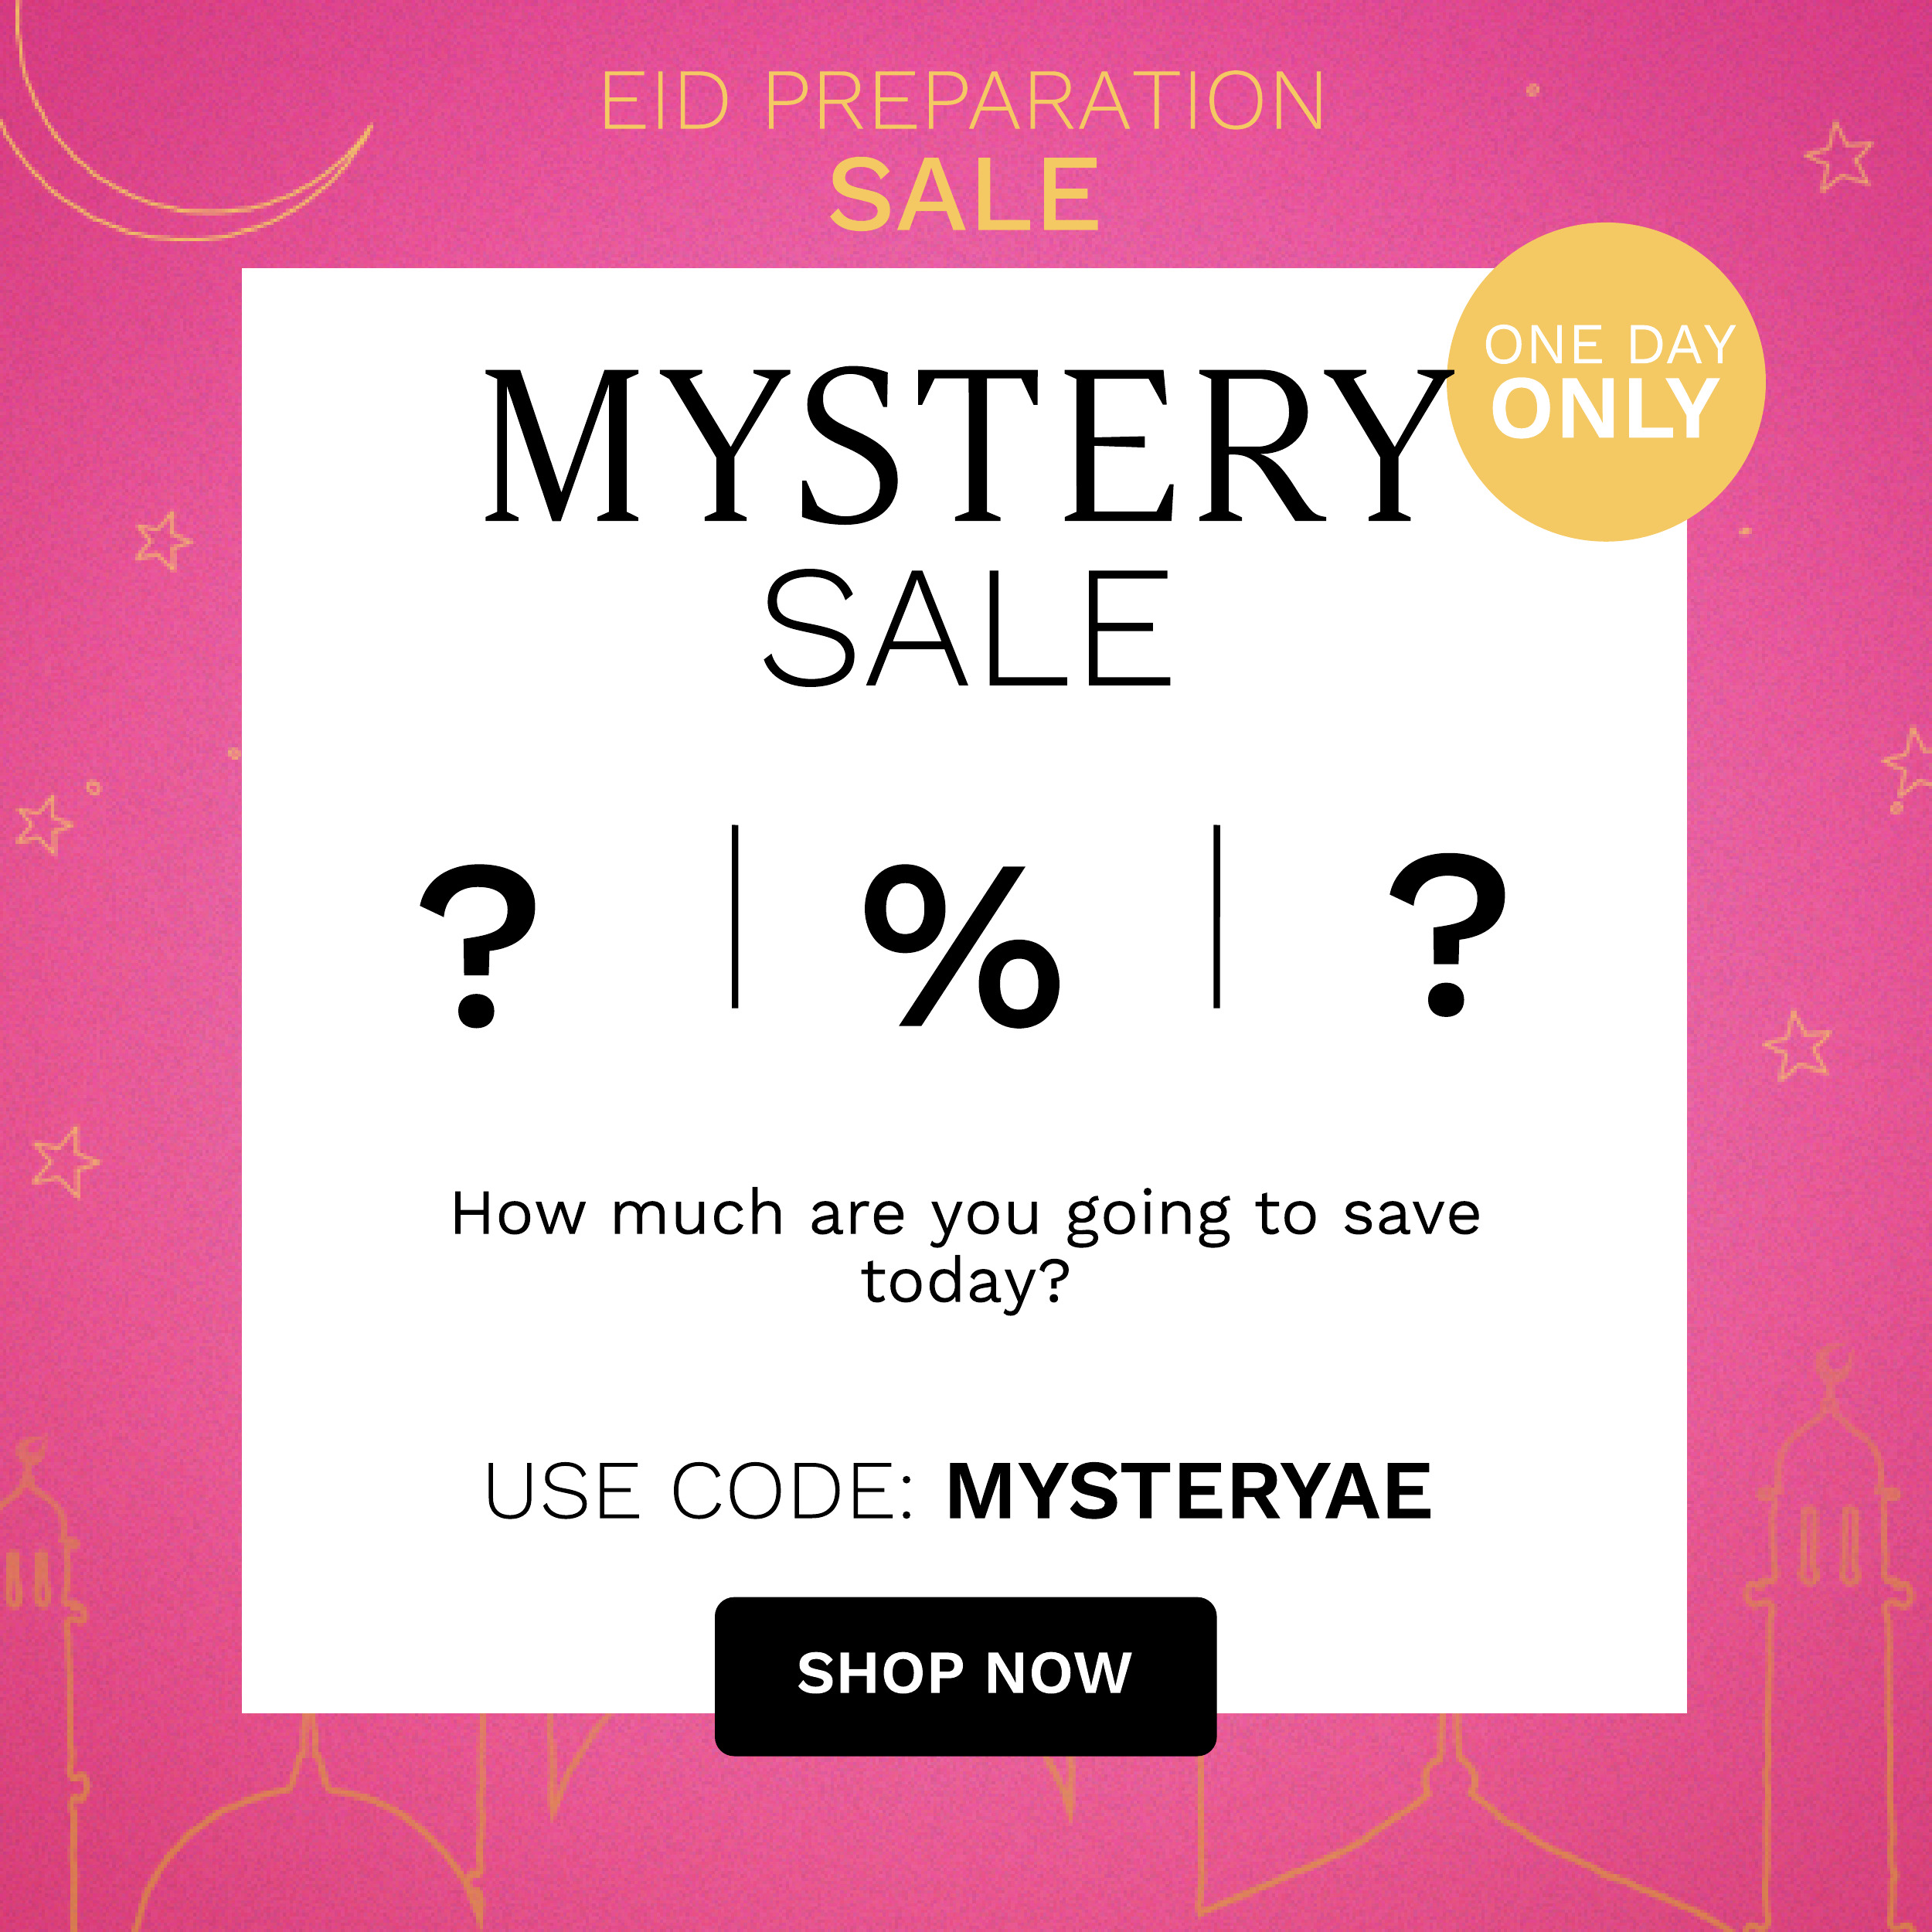 MYSTERY SALE 2 o ? How much are you going to save today? USE CODE: MYSTERYAE SHOP NOW 